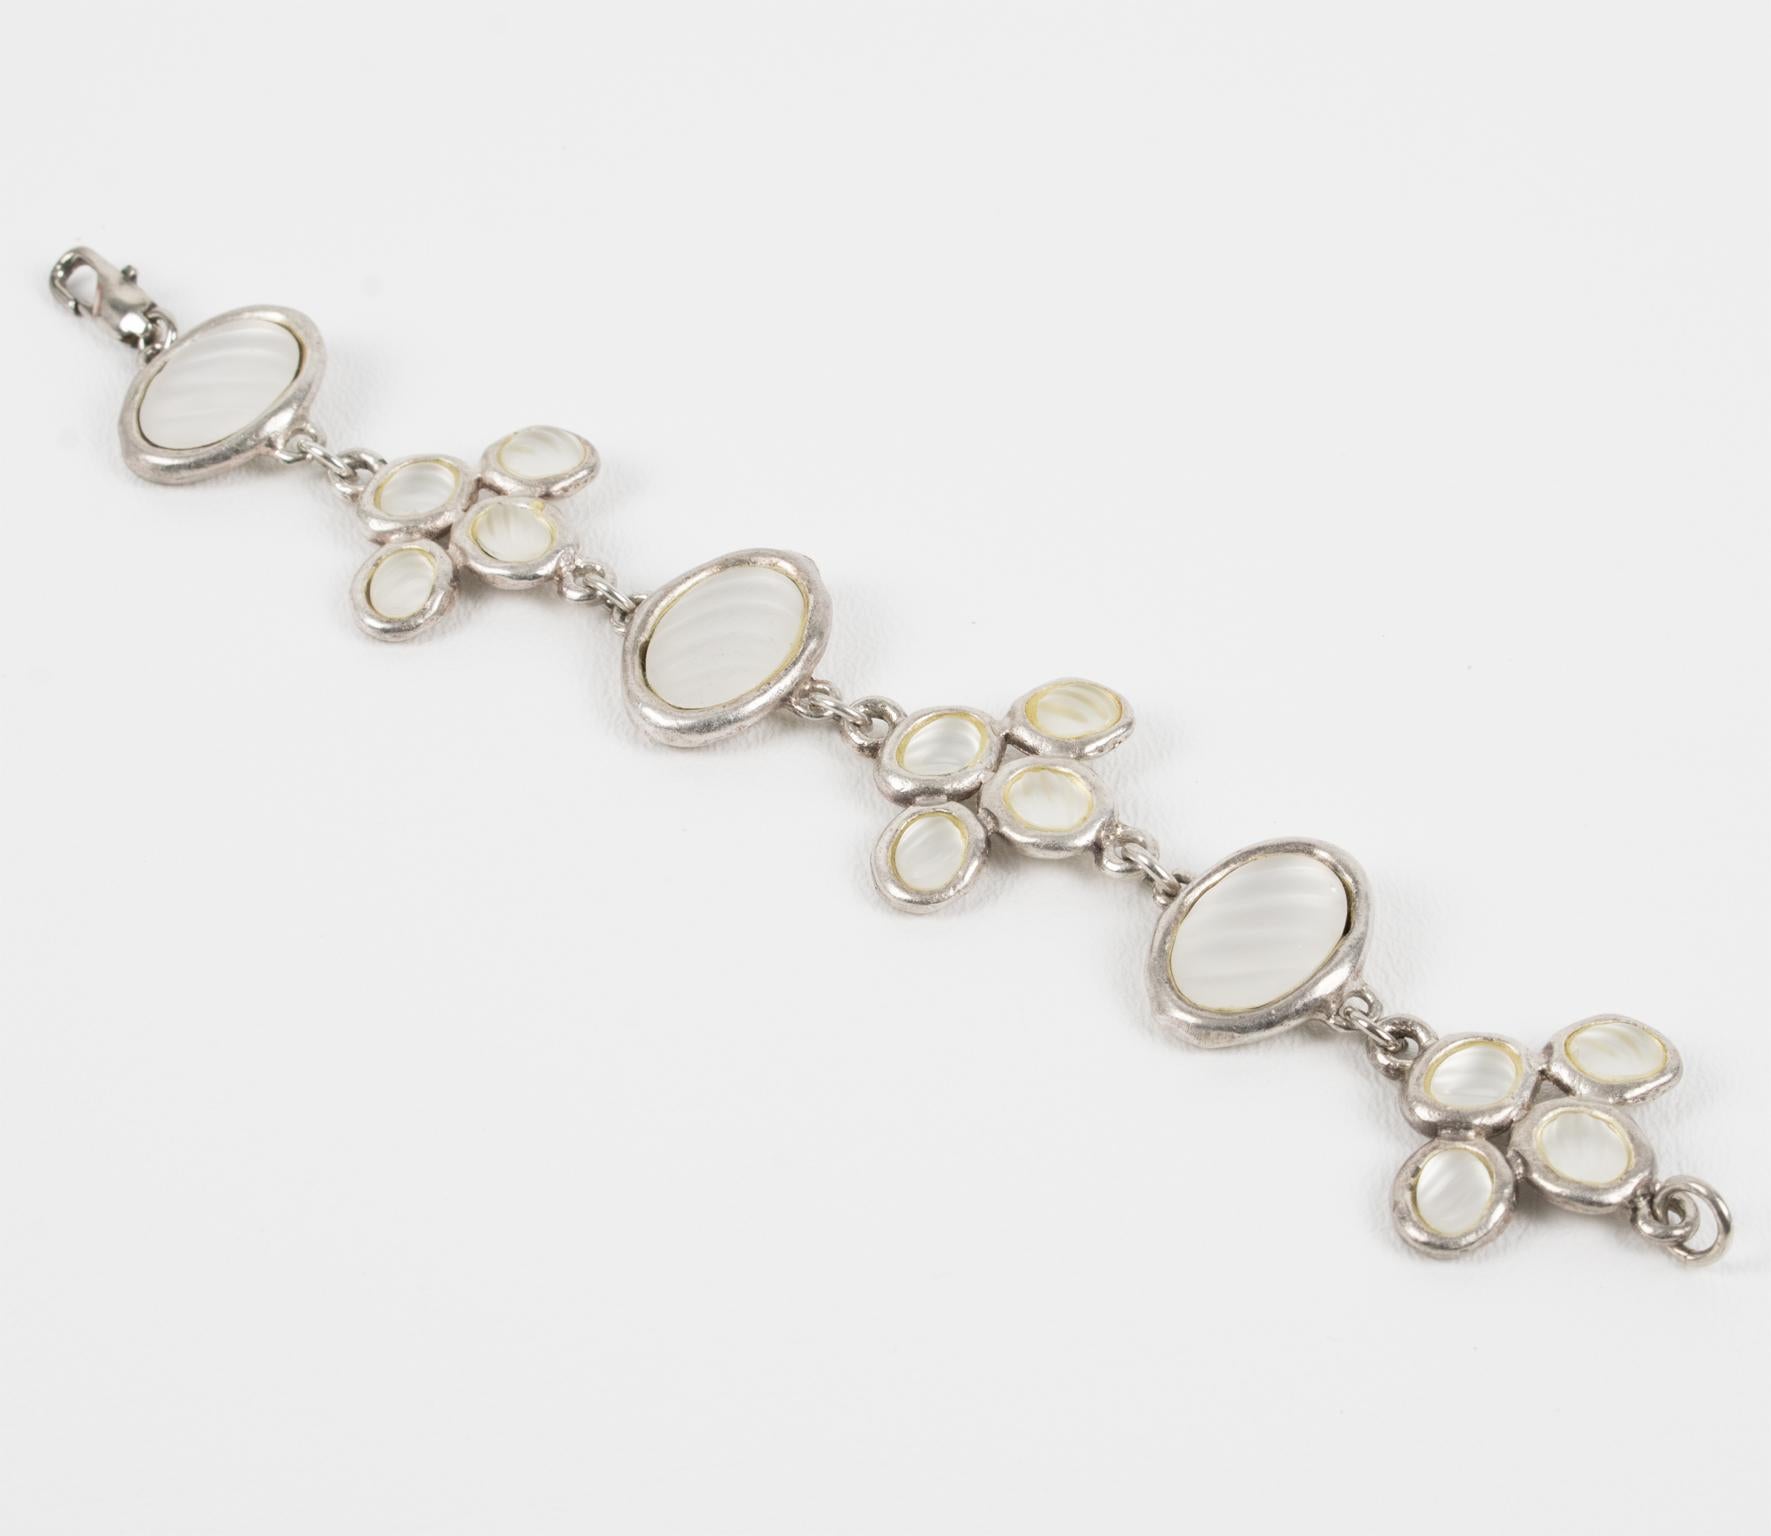 Madame Gres Paris designed this beautiful link bracelet in the 1980s. It features a modernist geometric design with silvered metal elements frames topped with opalescent frosted glass cabochons with striped carved patterns. The bracelet closes with